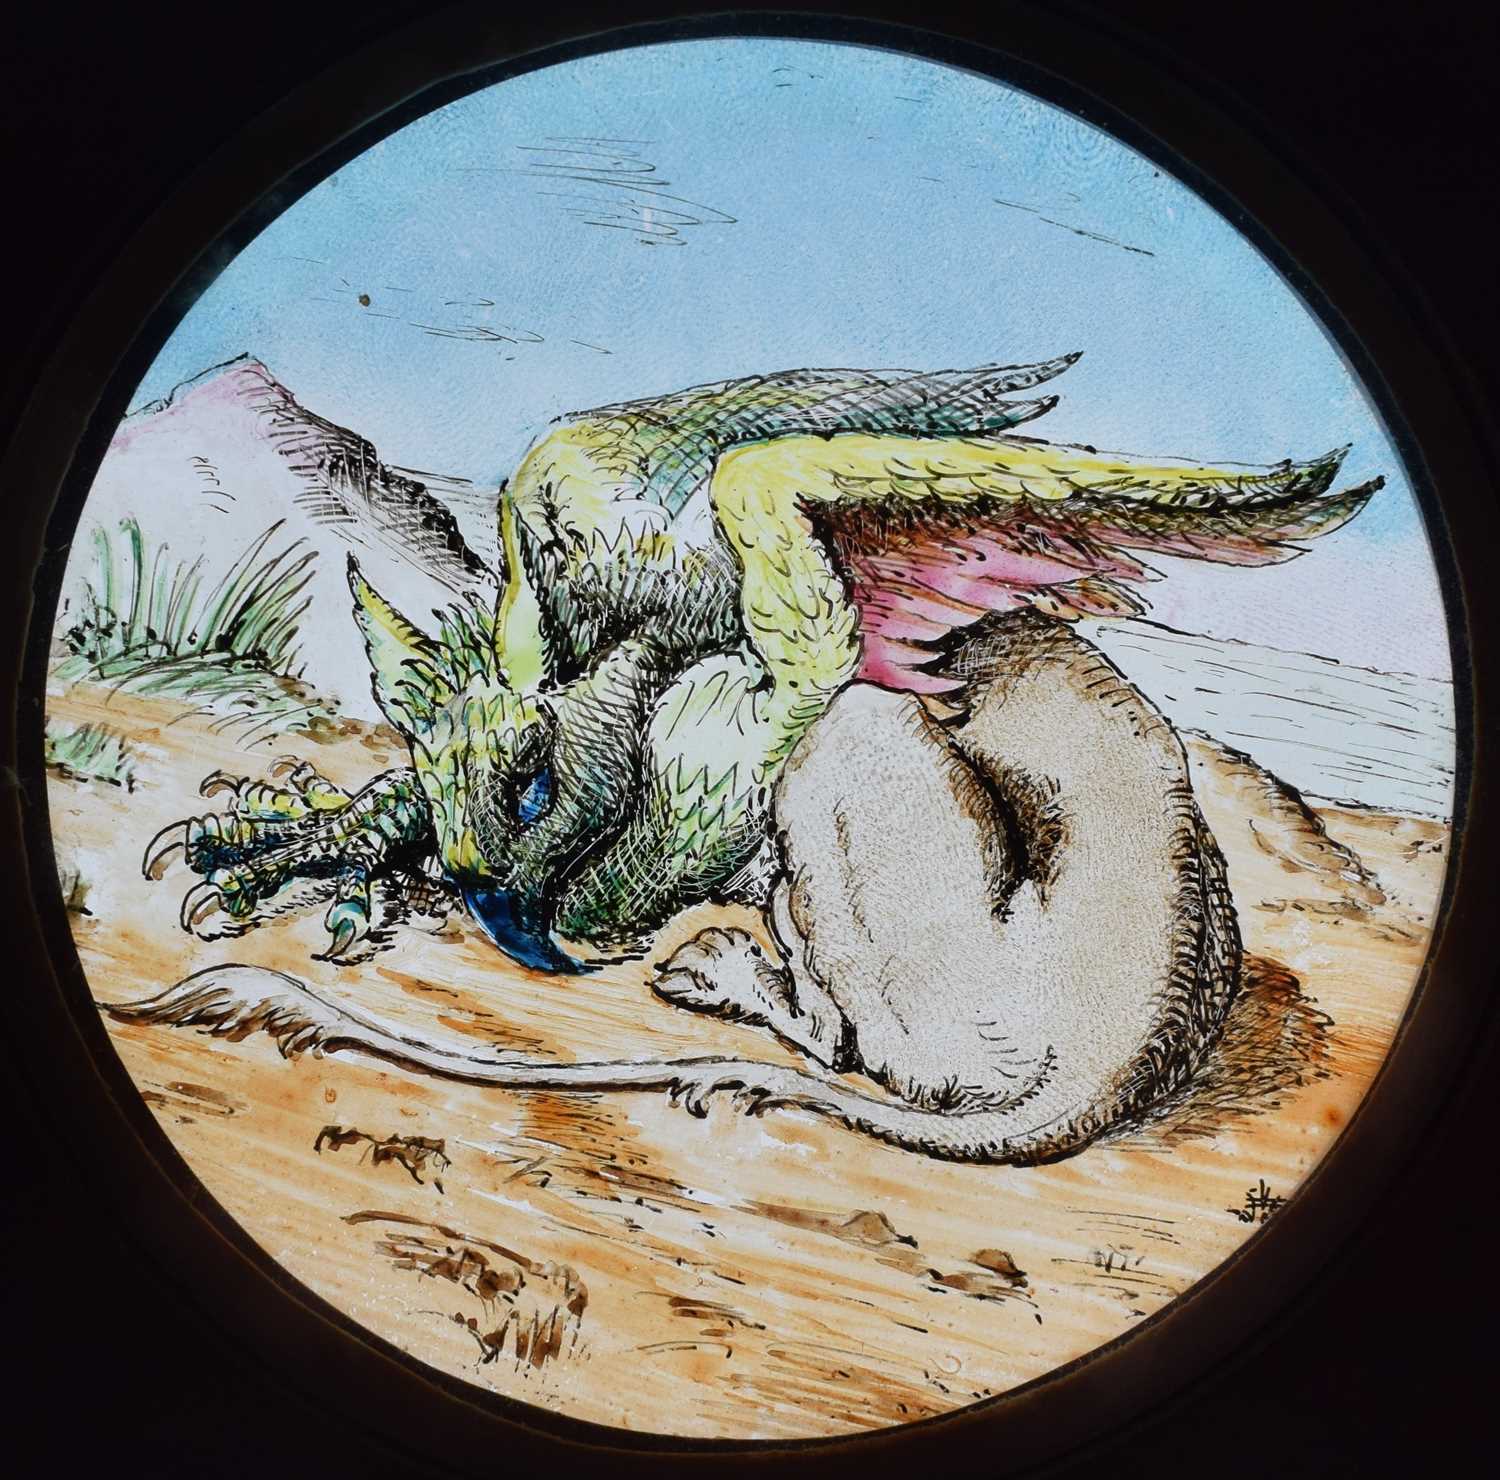 Magic Lantern Slides, Hand painted. Alice's Adventures in Wonderland & Through the Looking Glass. A - Image 37 of 48